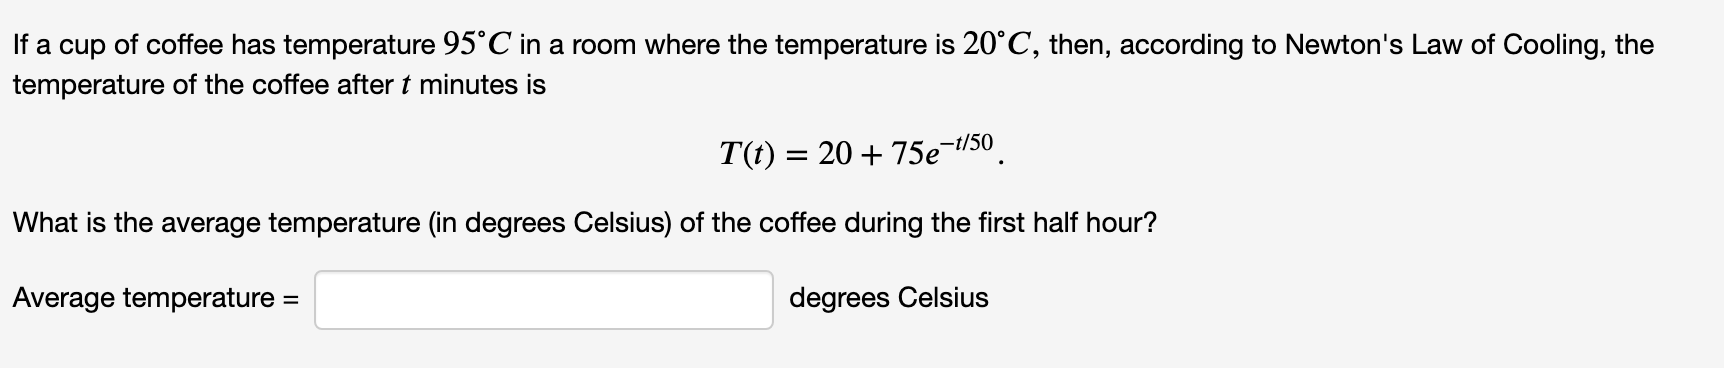 If a cup of coffee has temperature 95°C in a room where the temperature is 20°C, then, according to Newton's Law of Cooling, the
temperature of the coffee after t minutes is
T(t) = 20 + 75e¬t/50
What is the average temperature (in degrees Celsius) of the coffee during the first half hour?
Average temperature
degrees Celsius
%3D
